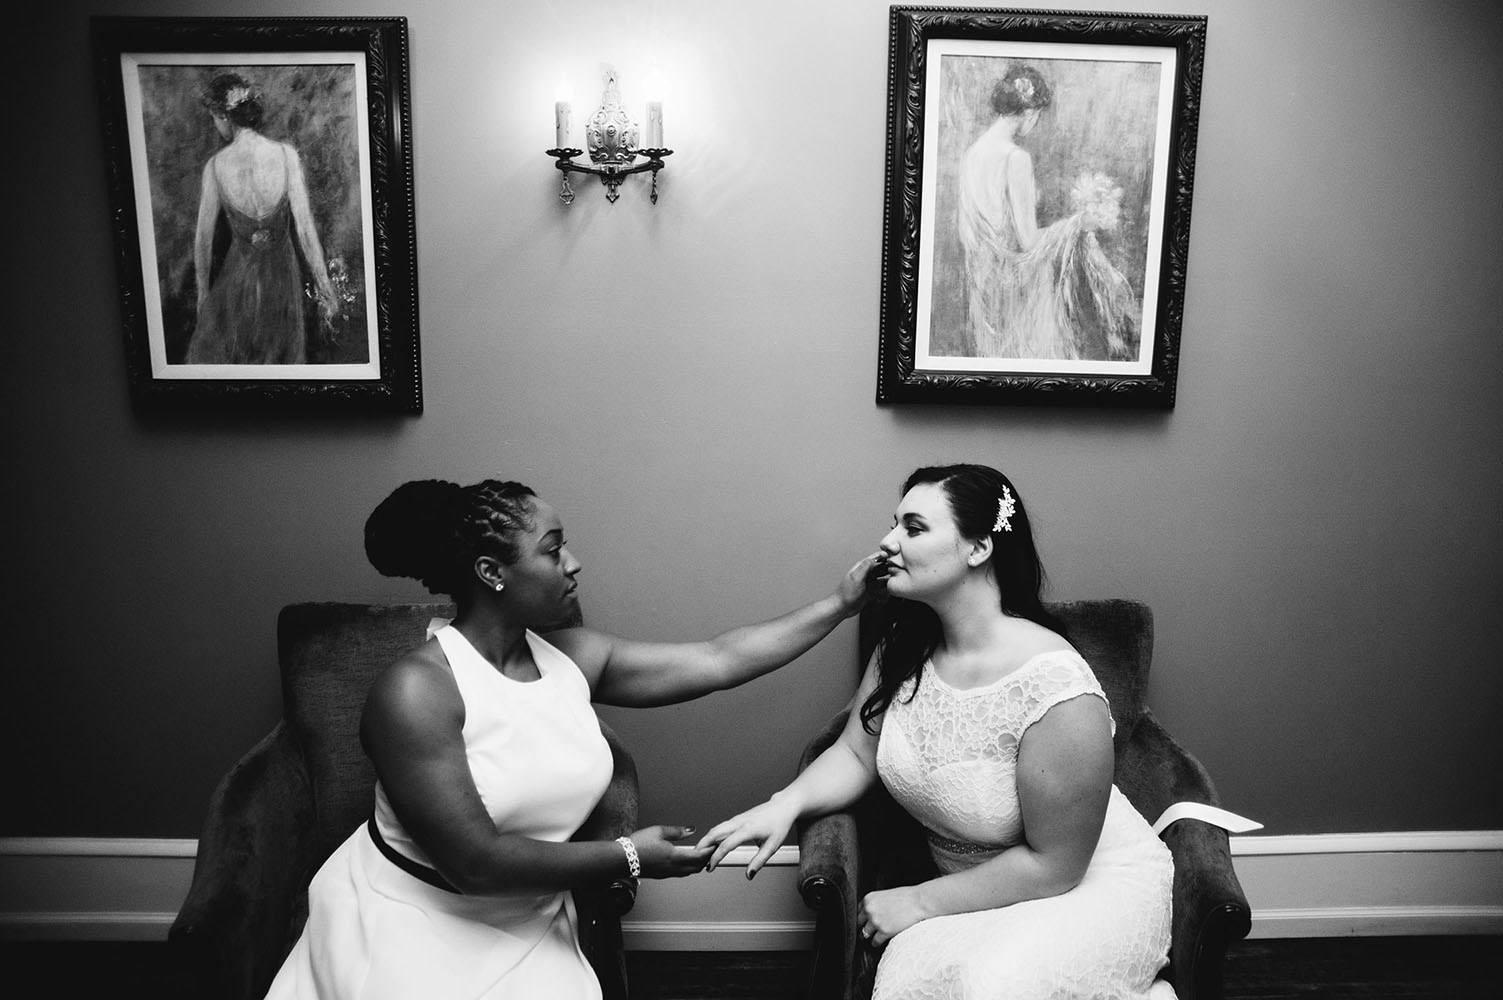 two brides holding hands